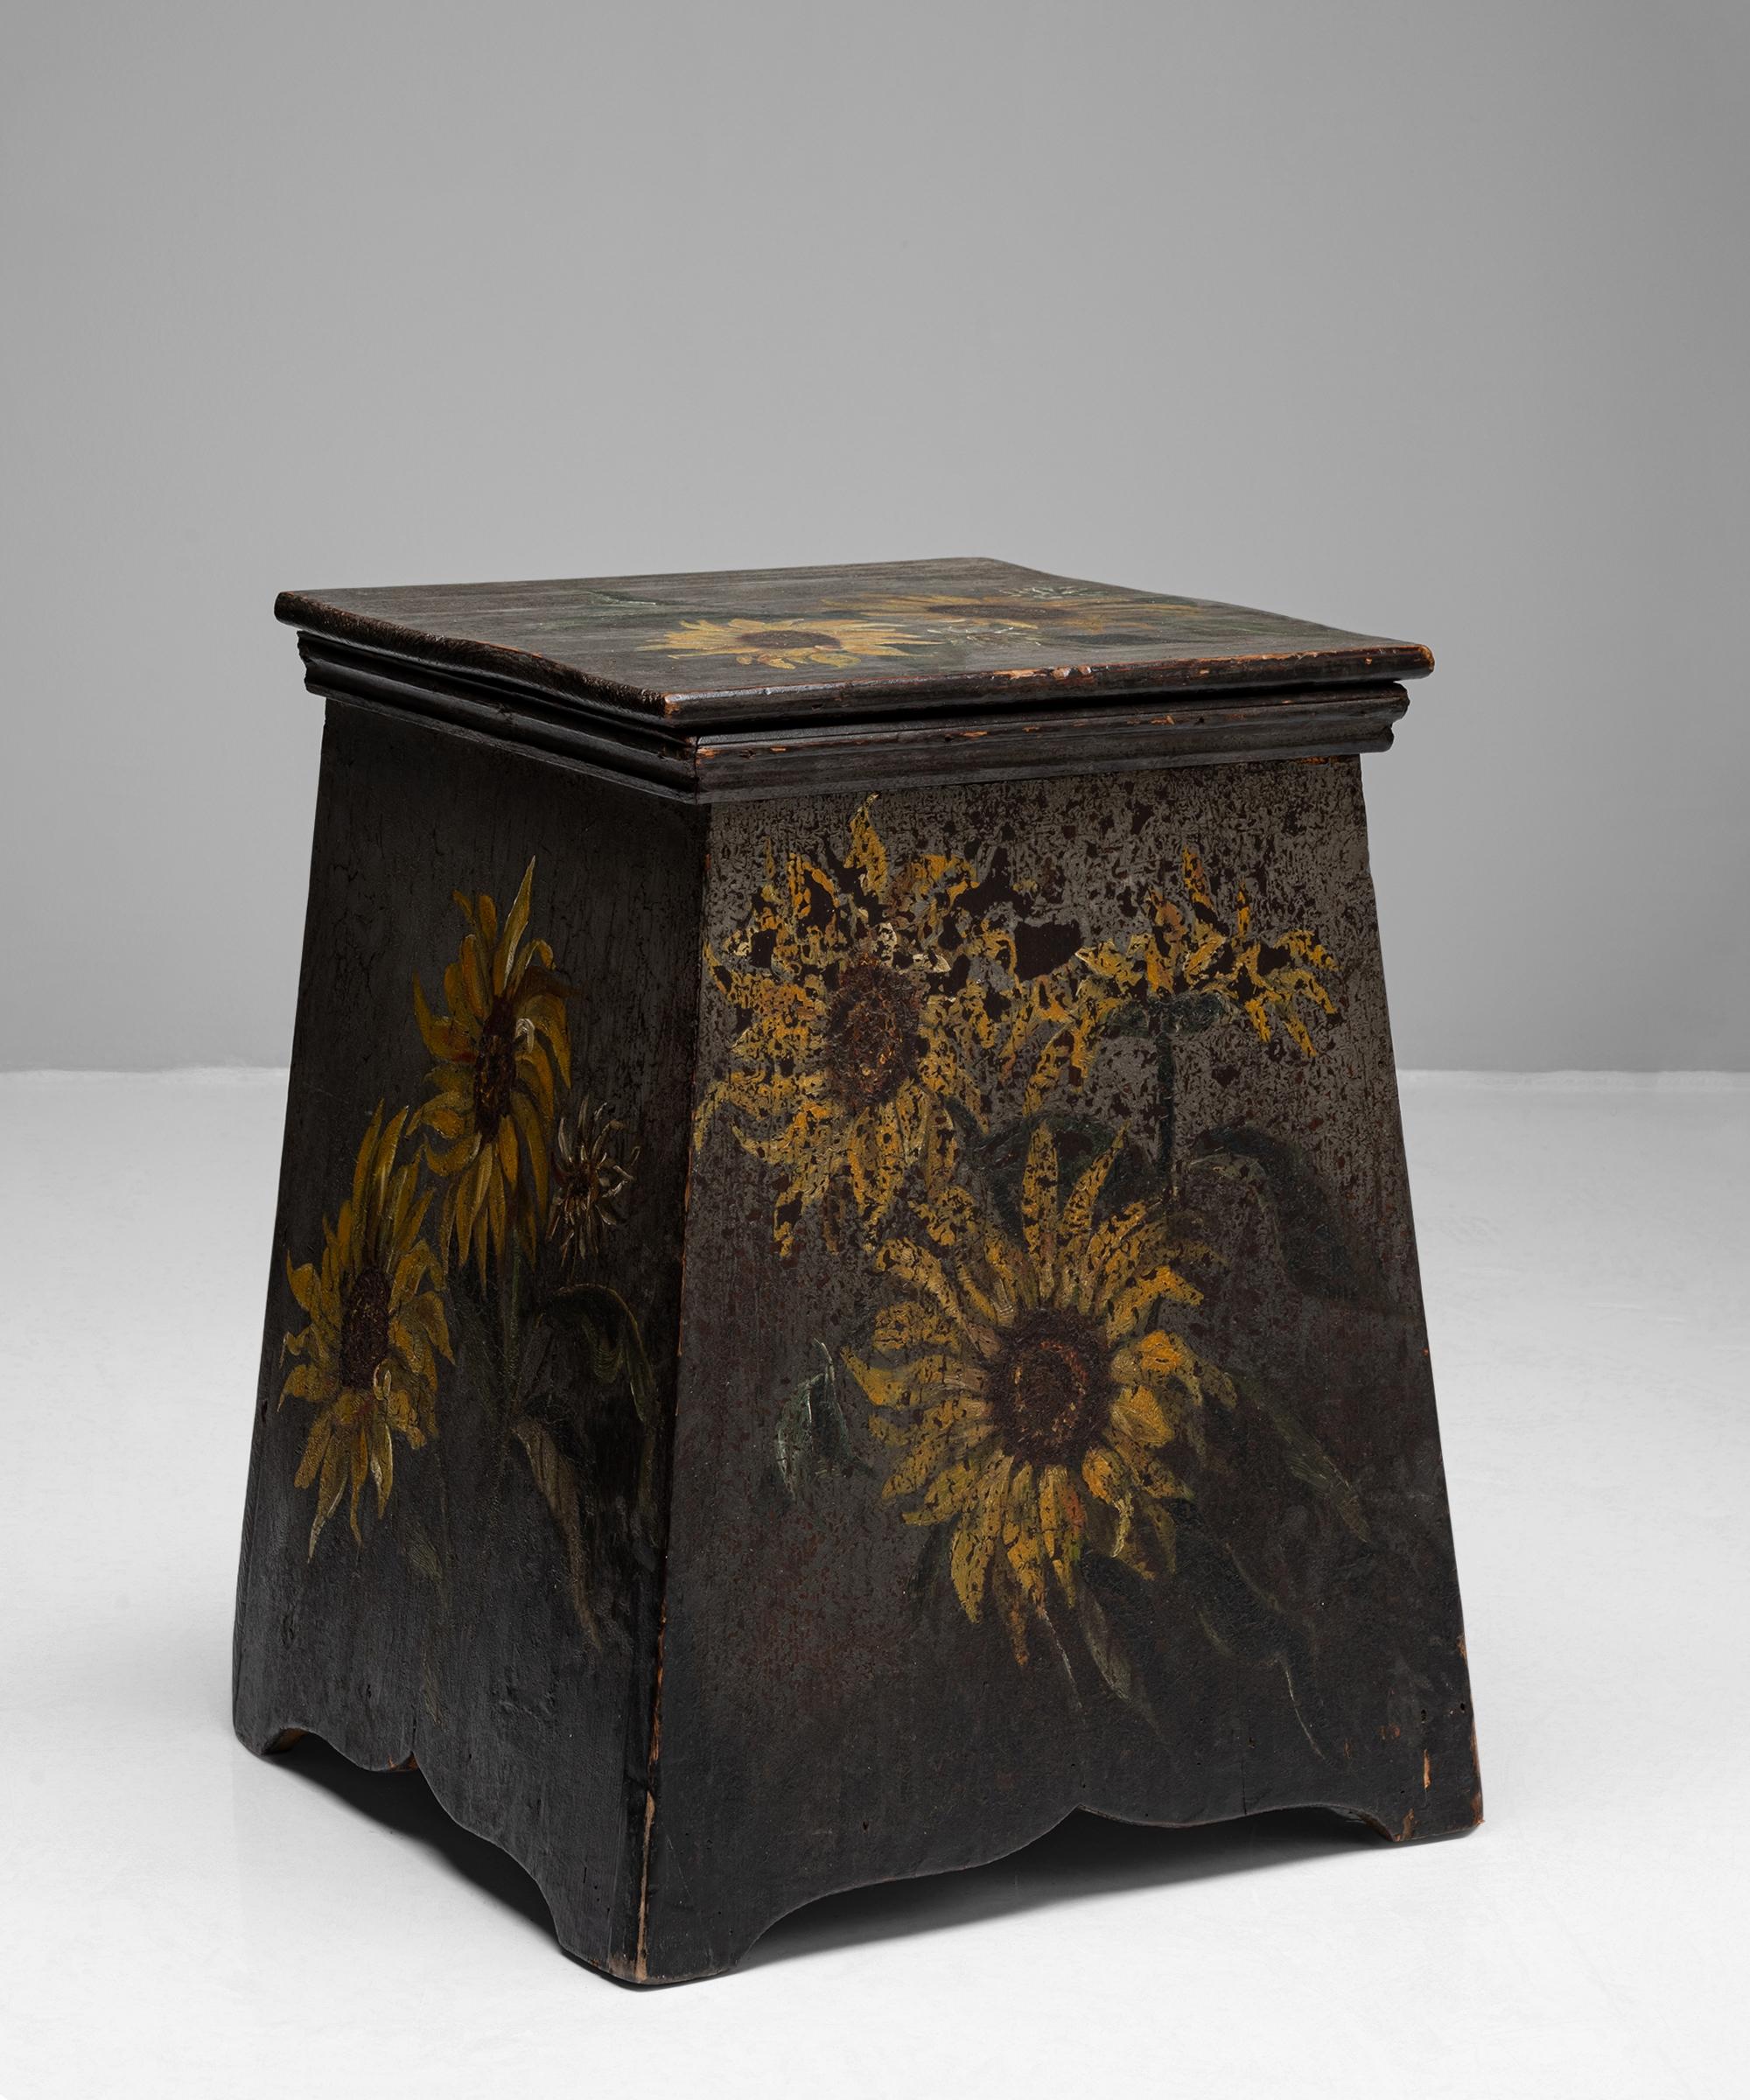 Painted sunflowers stool / end table
France, circa 1880

Original worn hand painted surface with space for storage.

Measures: 14.5” W X 13.25” D X 20.25” H.